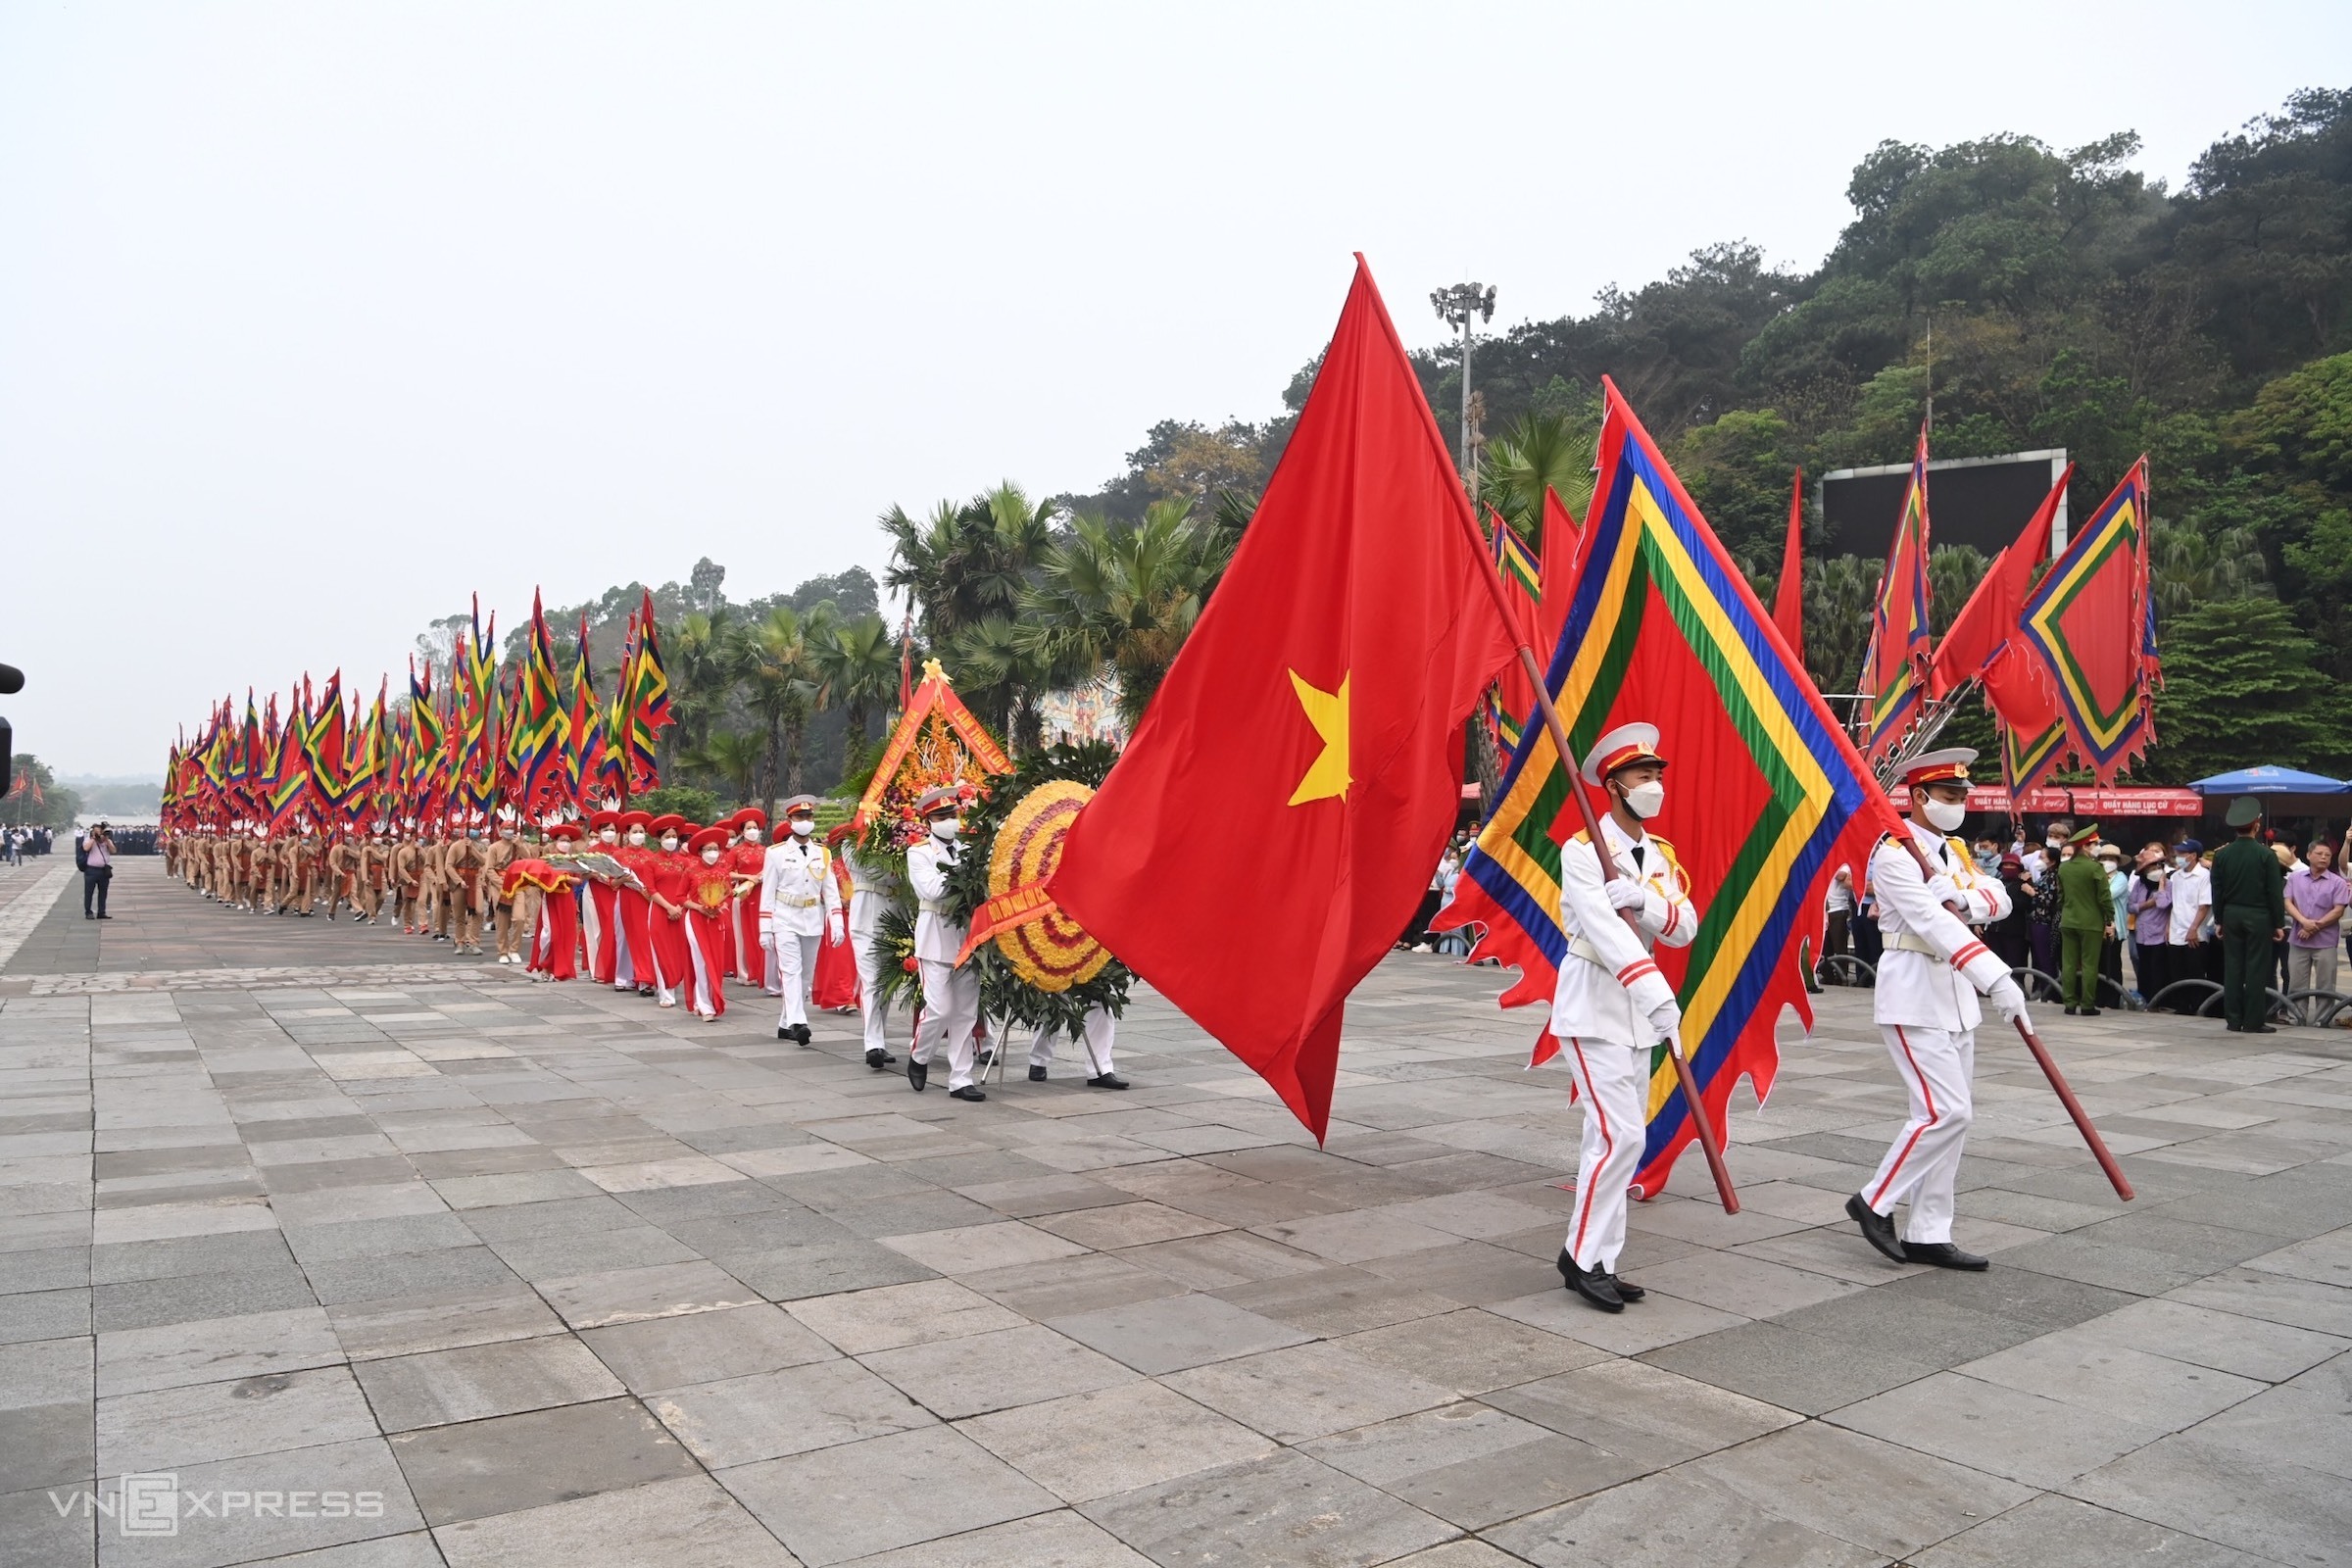 Vietnamese people commemorate the Hung Kings (2879-258 BCE), the nations founders, on the 10th day of the third lunar month, which falls on Apr. 10 this year. Traditionally, a festival is organized at the Hung Kings Temple at Nghia Linh Mountain in Phu Tho Province, which neighbors Hanoi.